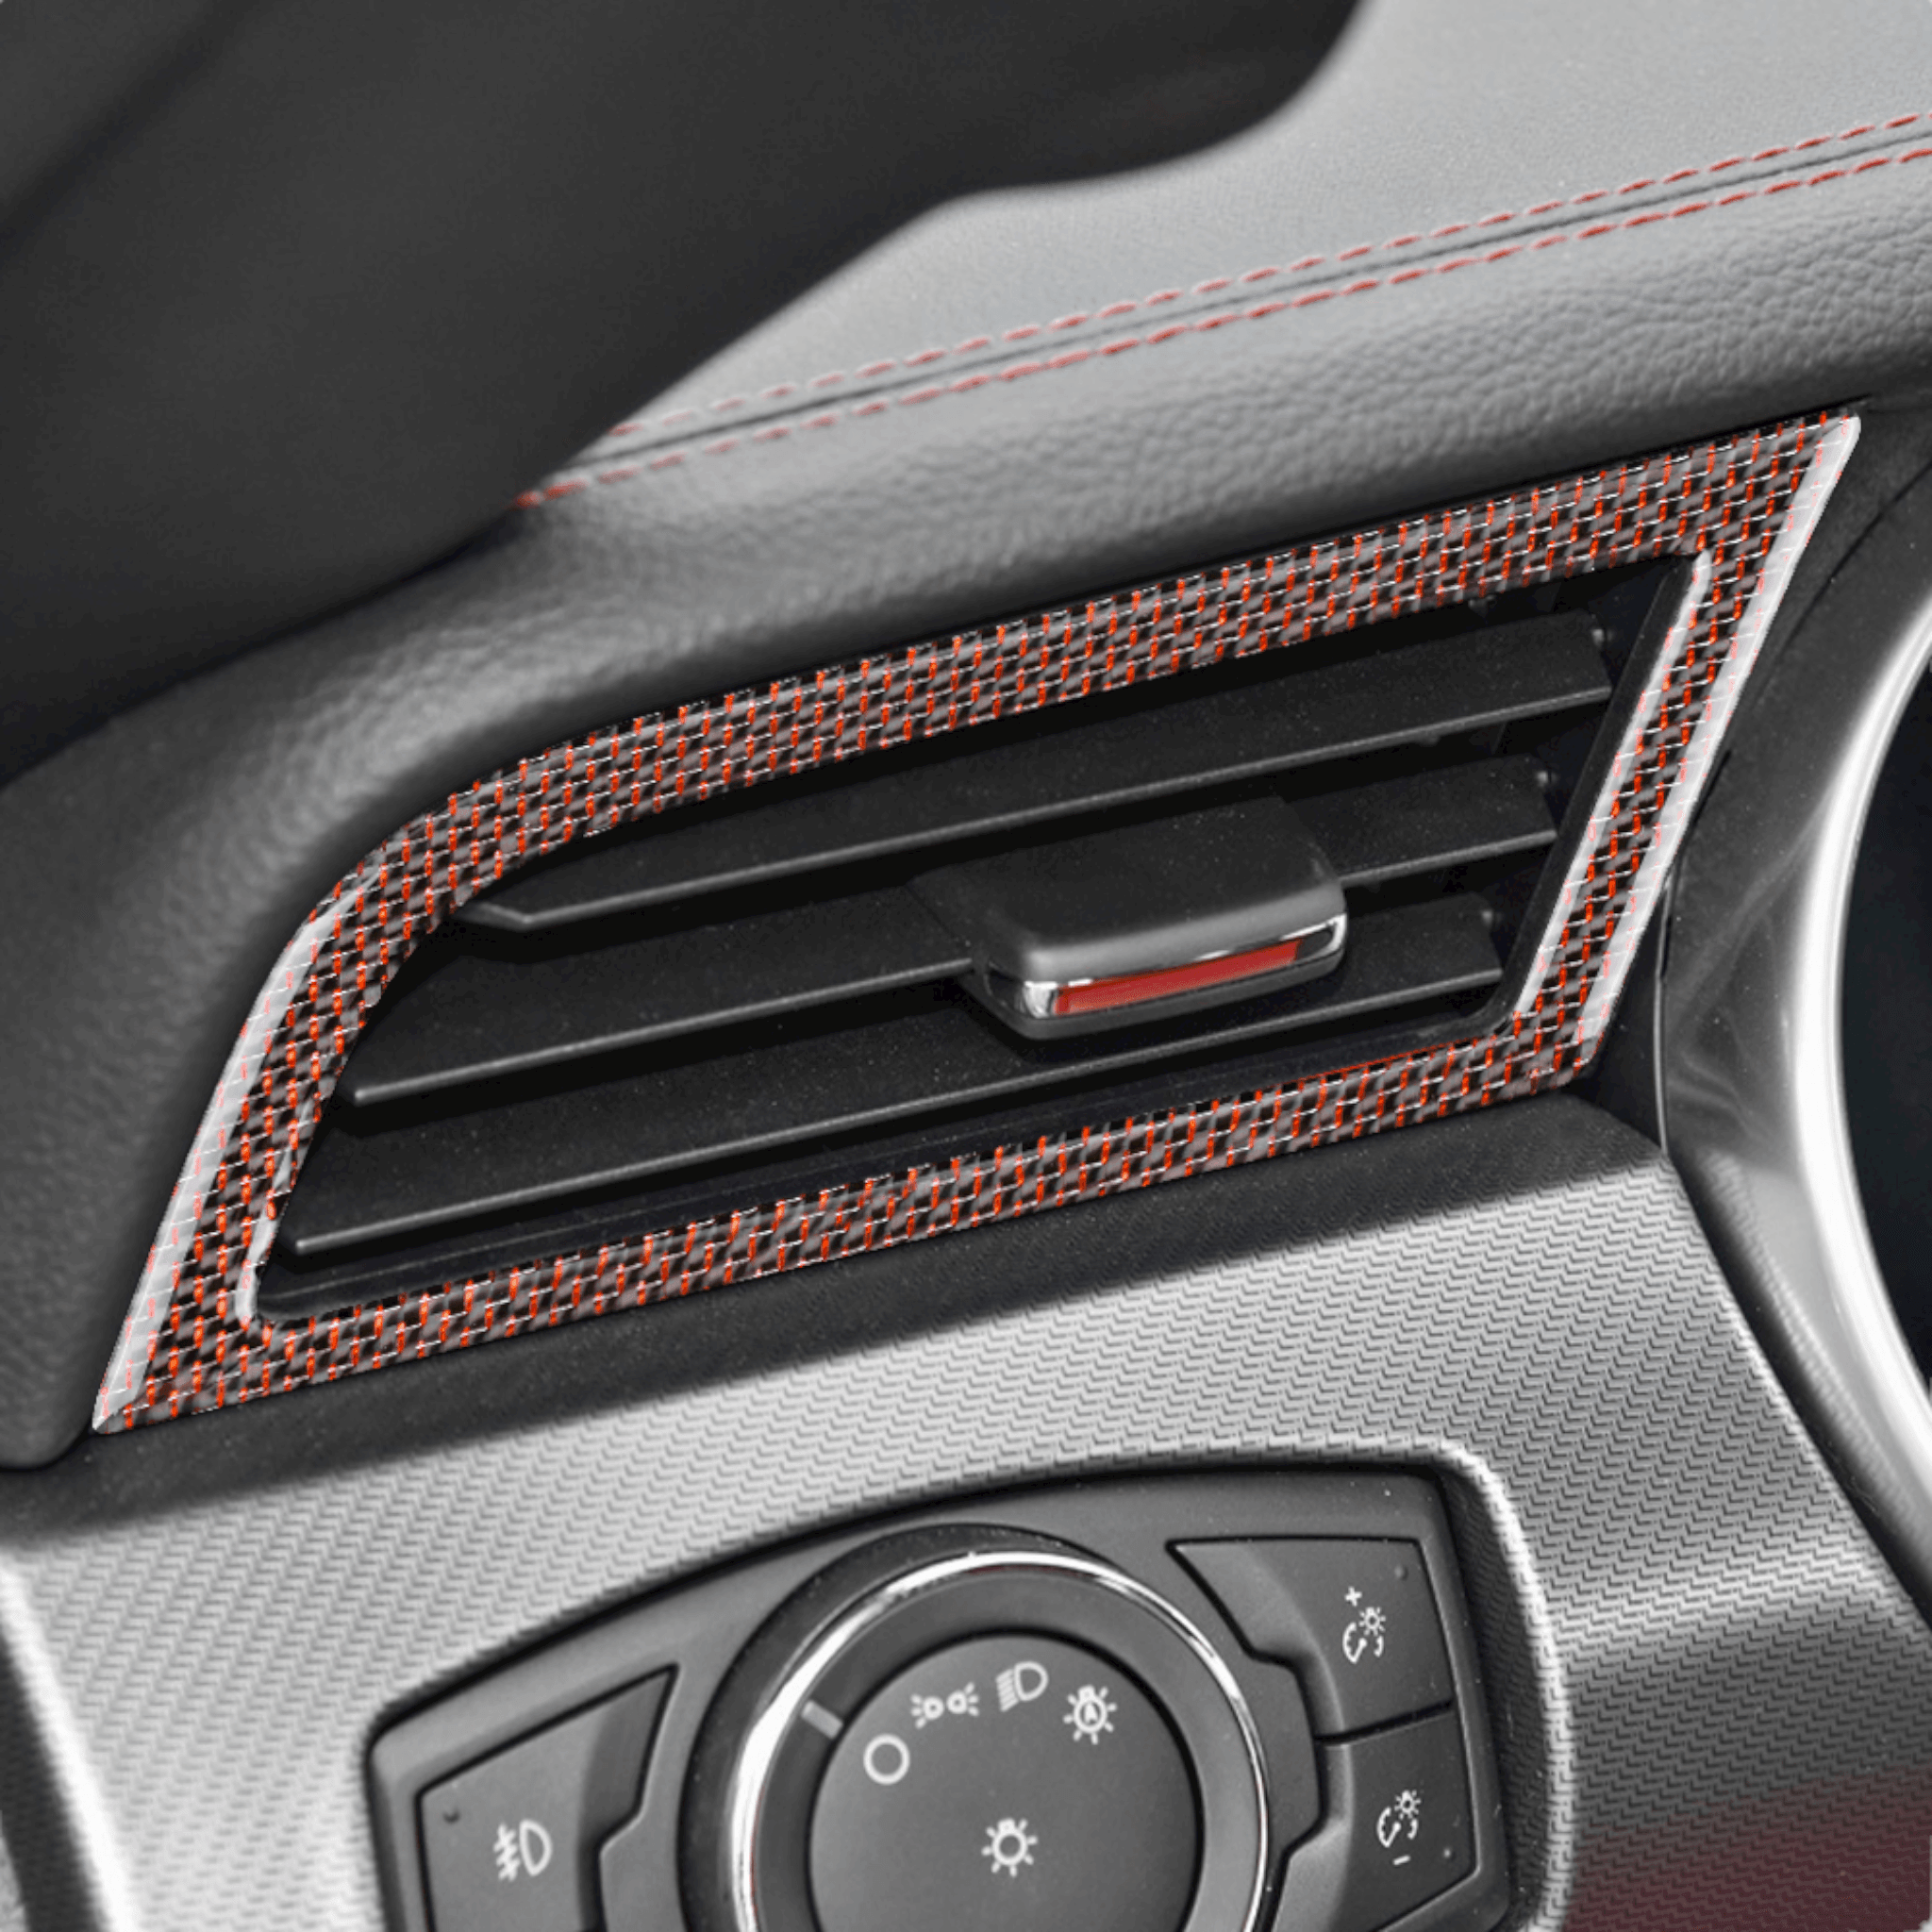 Reflective Carbon Fiber Dashboard AC Vent Trim Overlay for Ford Mustang 2015-2023 -2pcs - carbonaddons Carbon Fiber Parts, Accessories, Upgrades, Mods